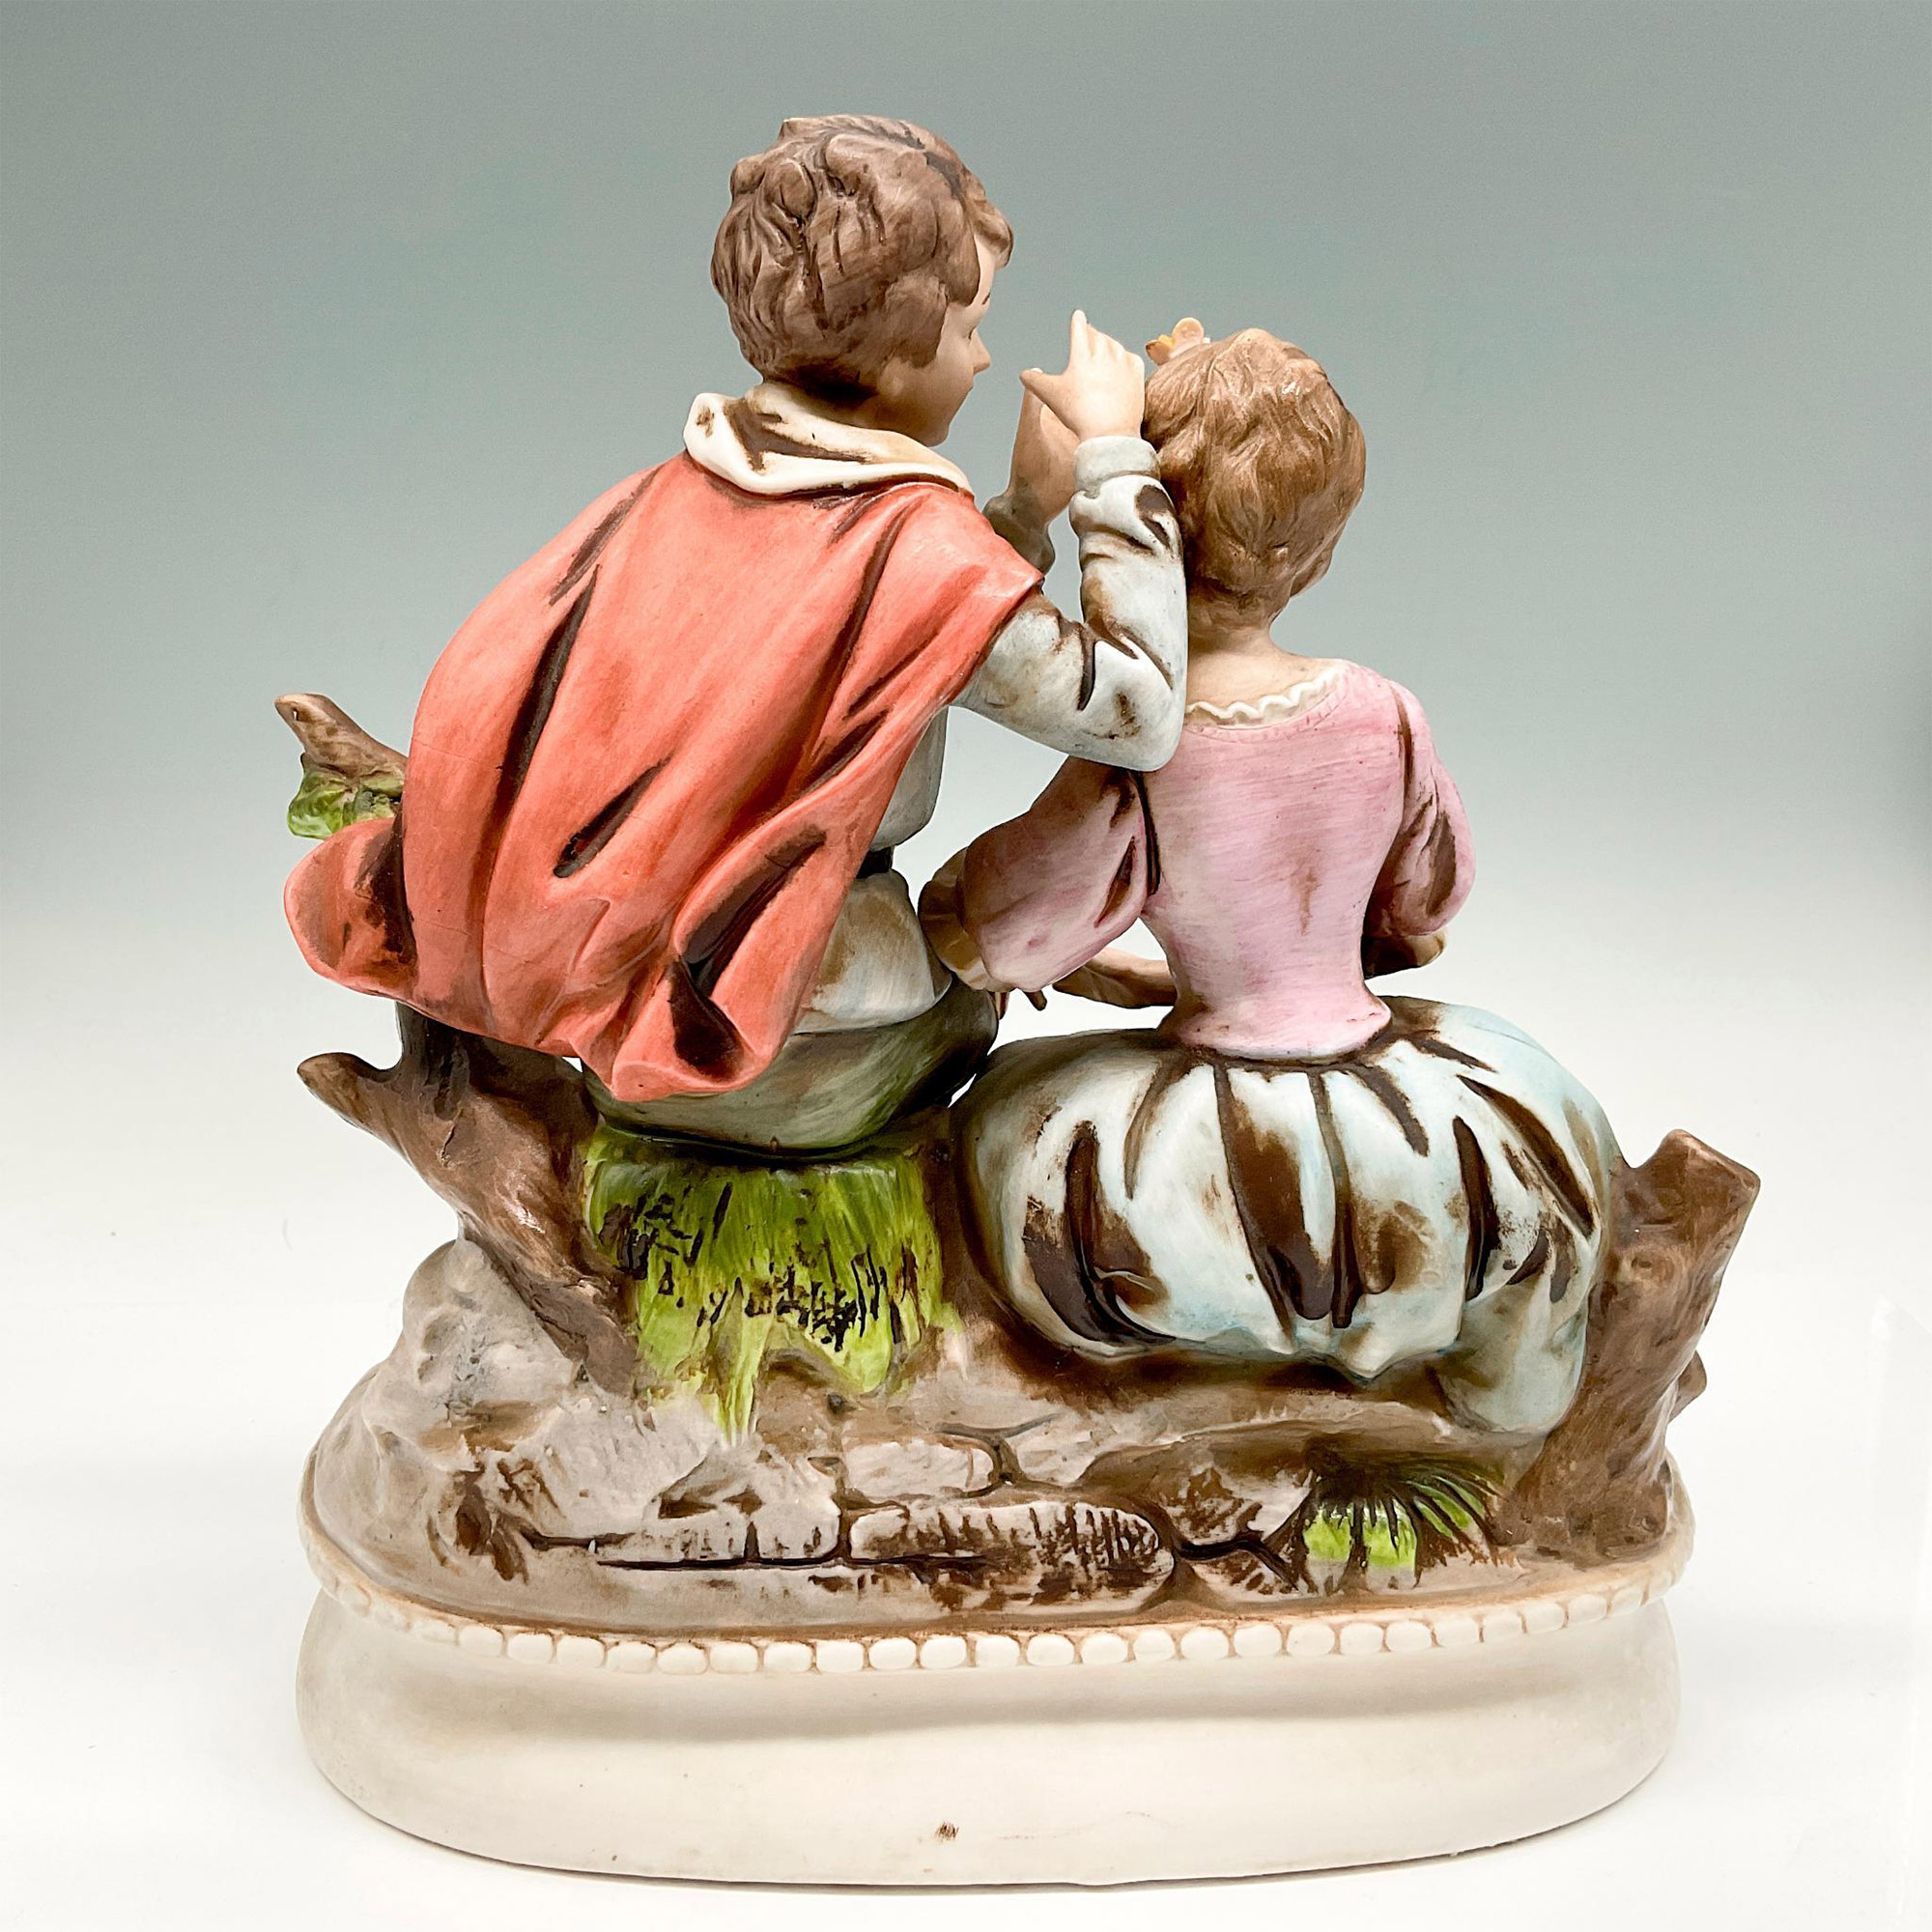 Lenwile Ardalt Bisque Figurine, Courting - Image 2 of 4